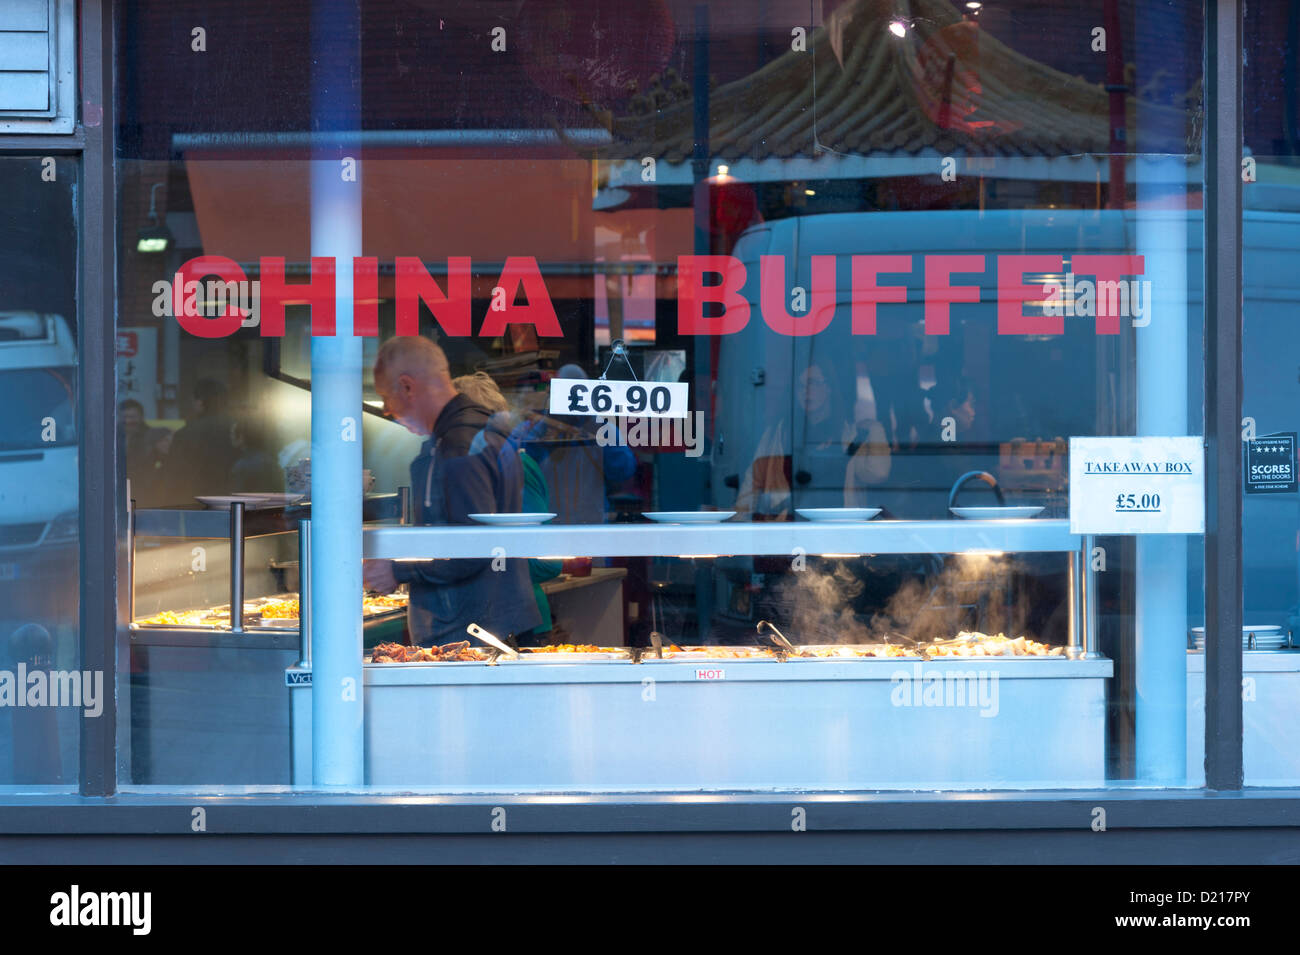 Window of a Chinese buffet restaurant at Newport Place Soho London UK with signs and prices Stock Photo